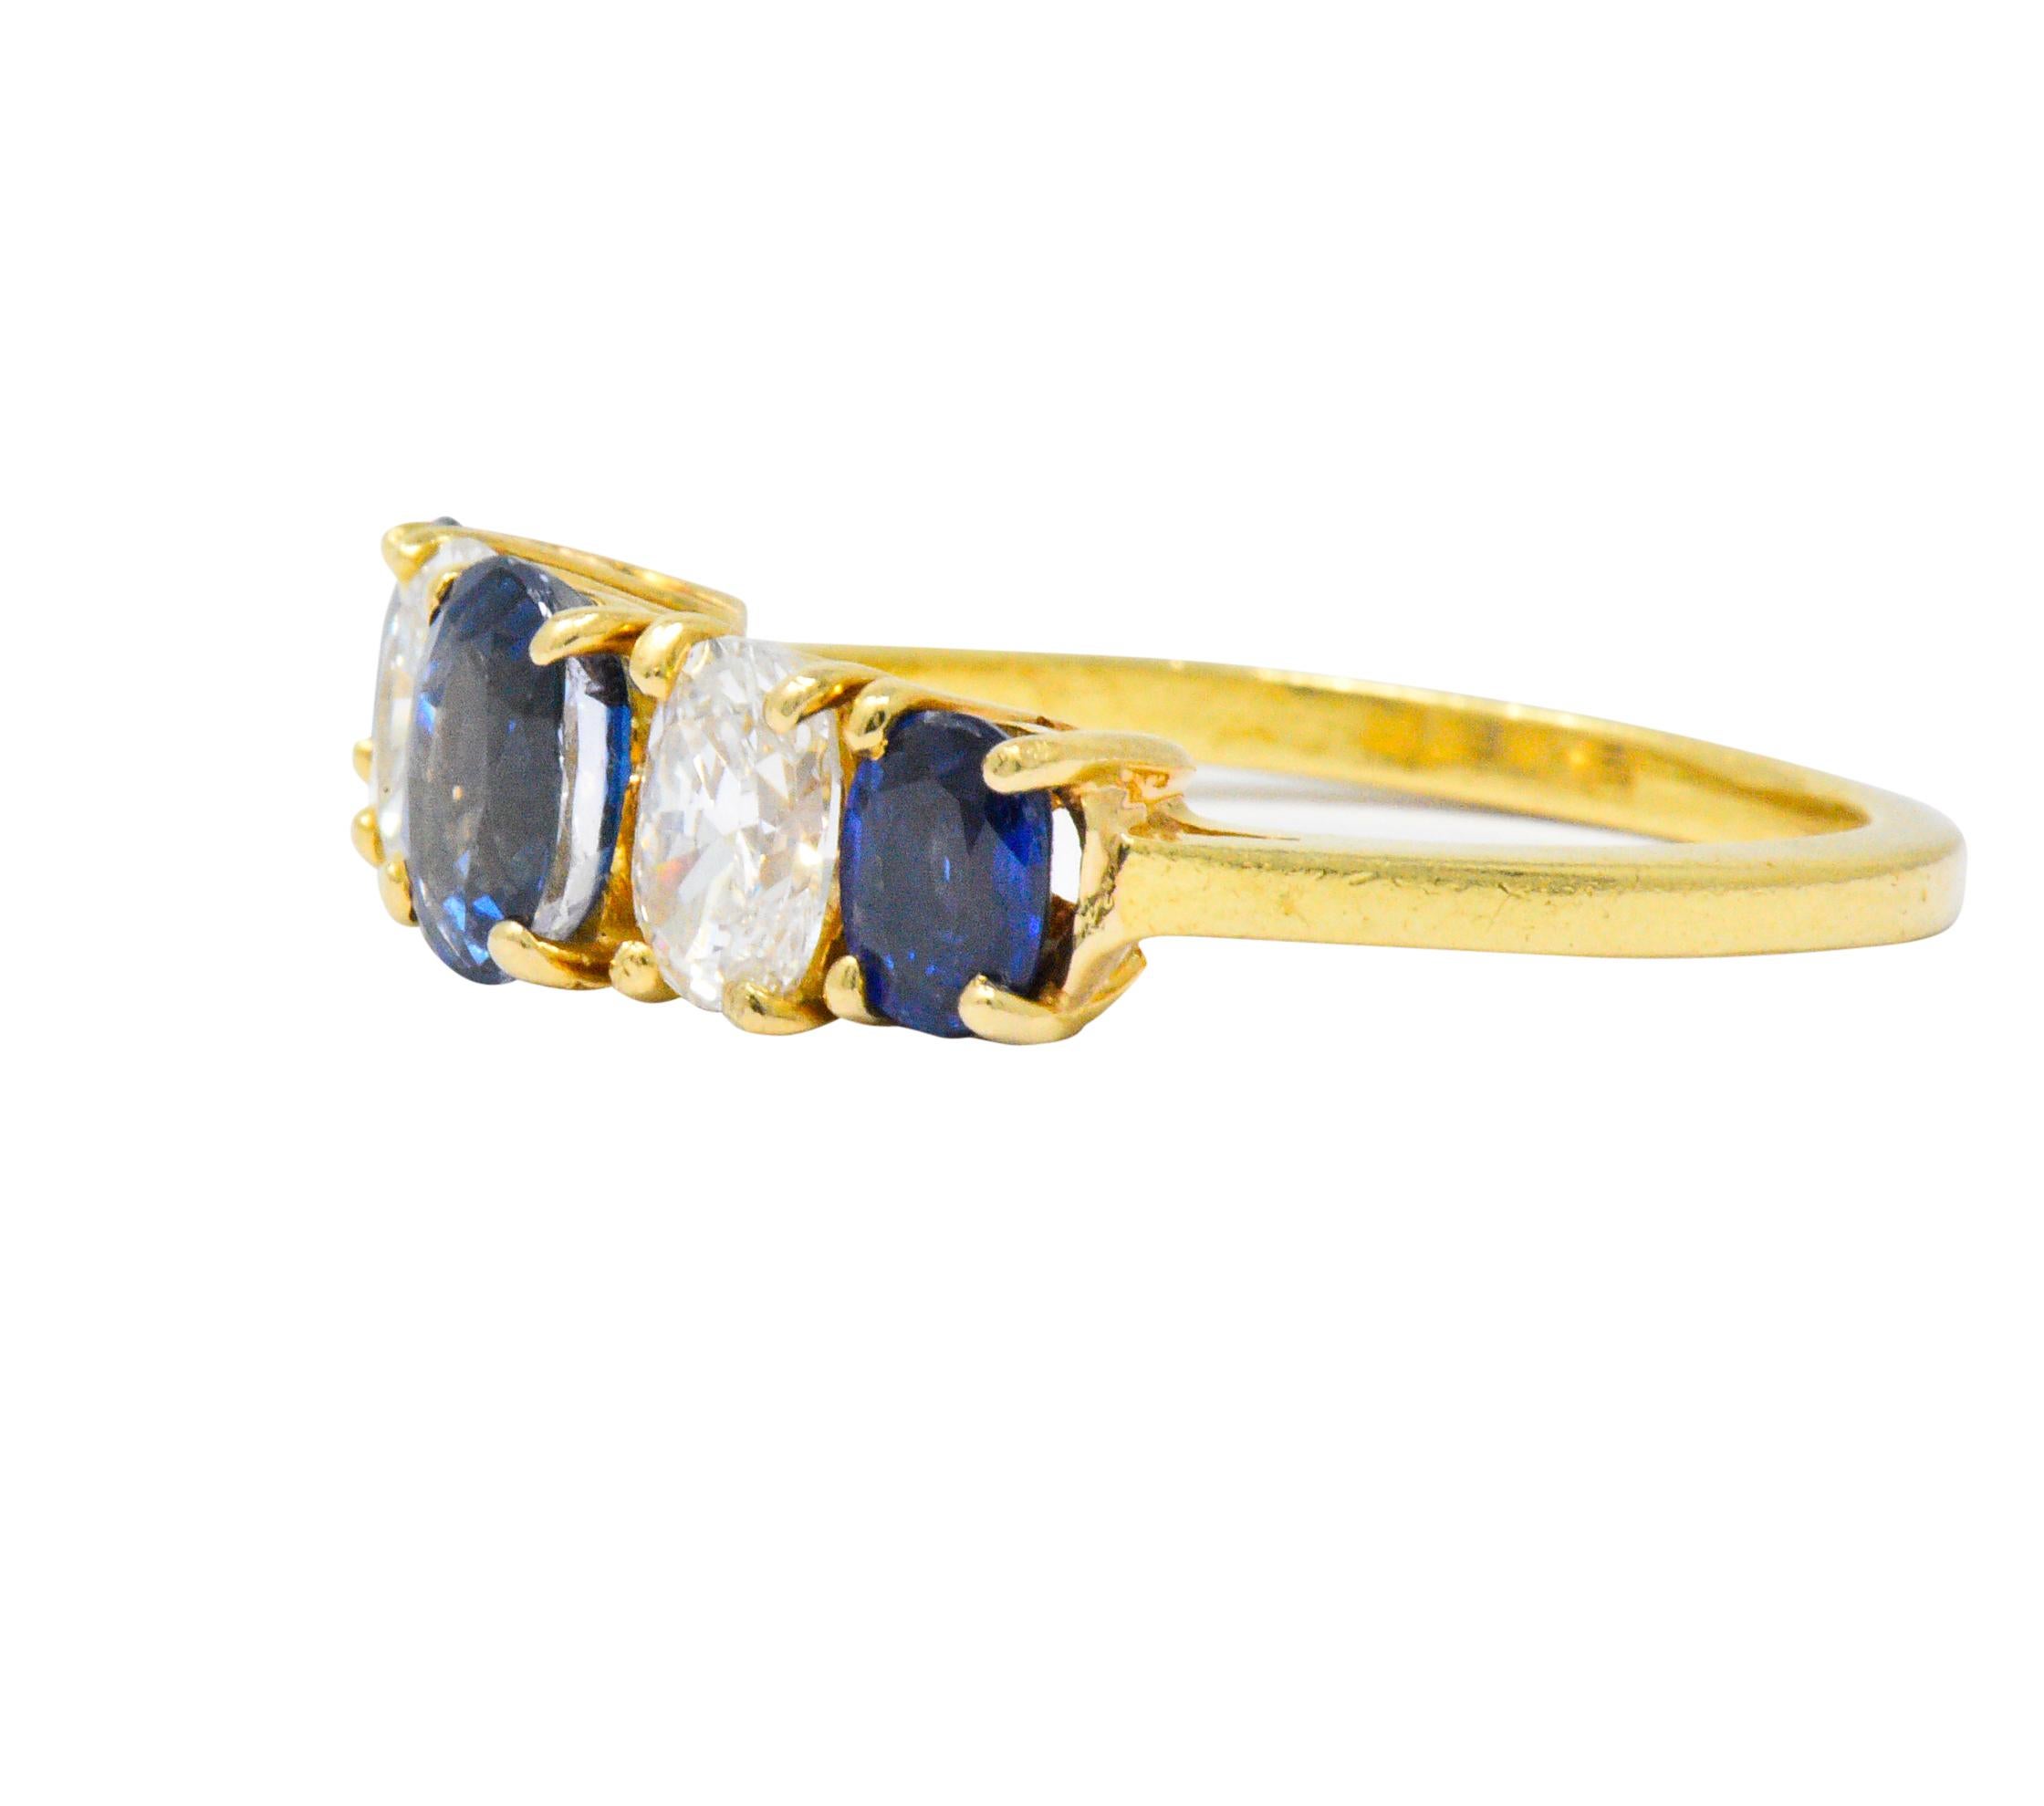 Five stone band ring designed with oval cut sapphire alternating with oval cut diamonds, prong set to front

Three sapphires weigh in total approximately 1.30 carats, a very well-matched royal blue

With two diamonds weighing in total approximately